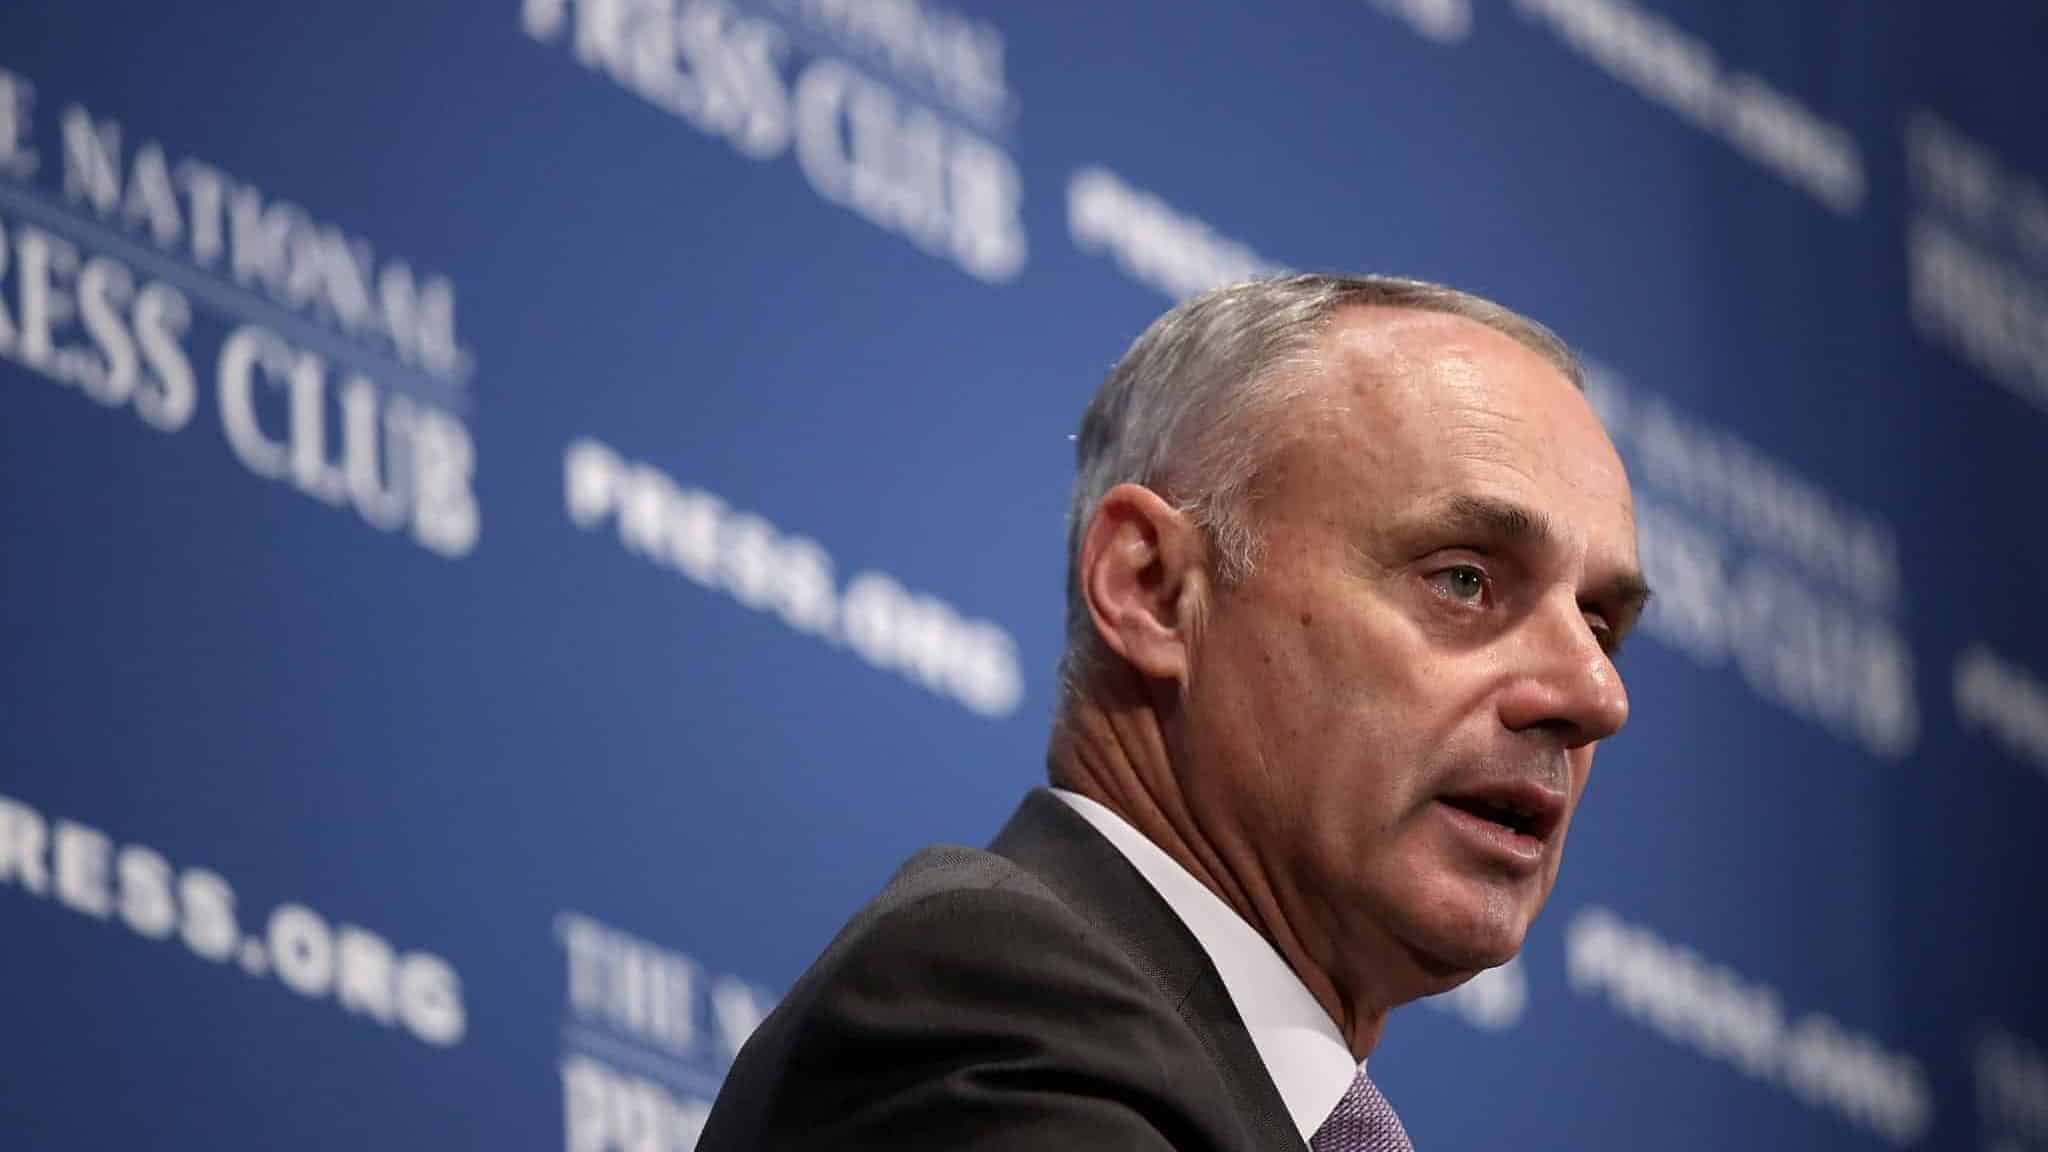 WASHINGTON, DC - JULY 16: Major League Baseball Commissioner Rob Manfred speaks at the National Press Club July 16, 2018 in Washington, DC. The MLB All-Star game will be held tomorrow at Nationals Park.